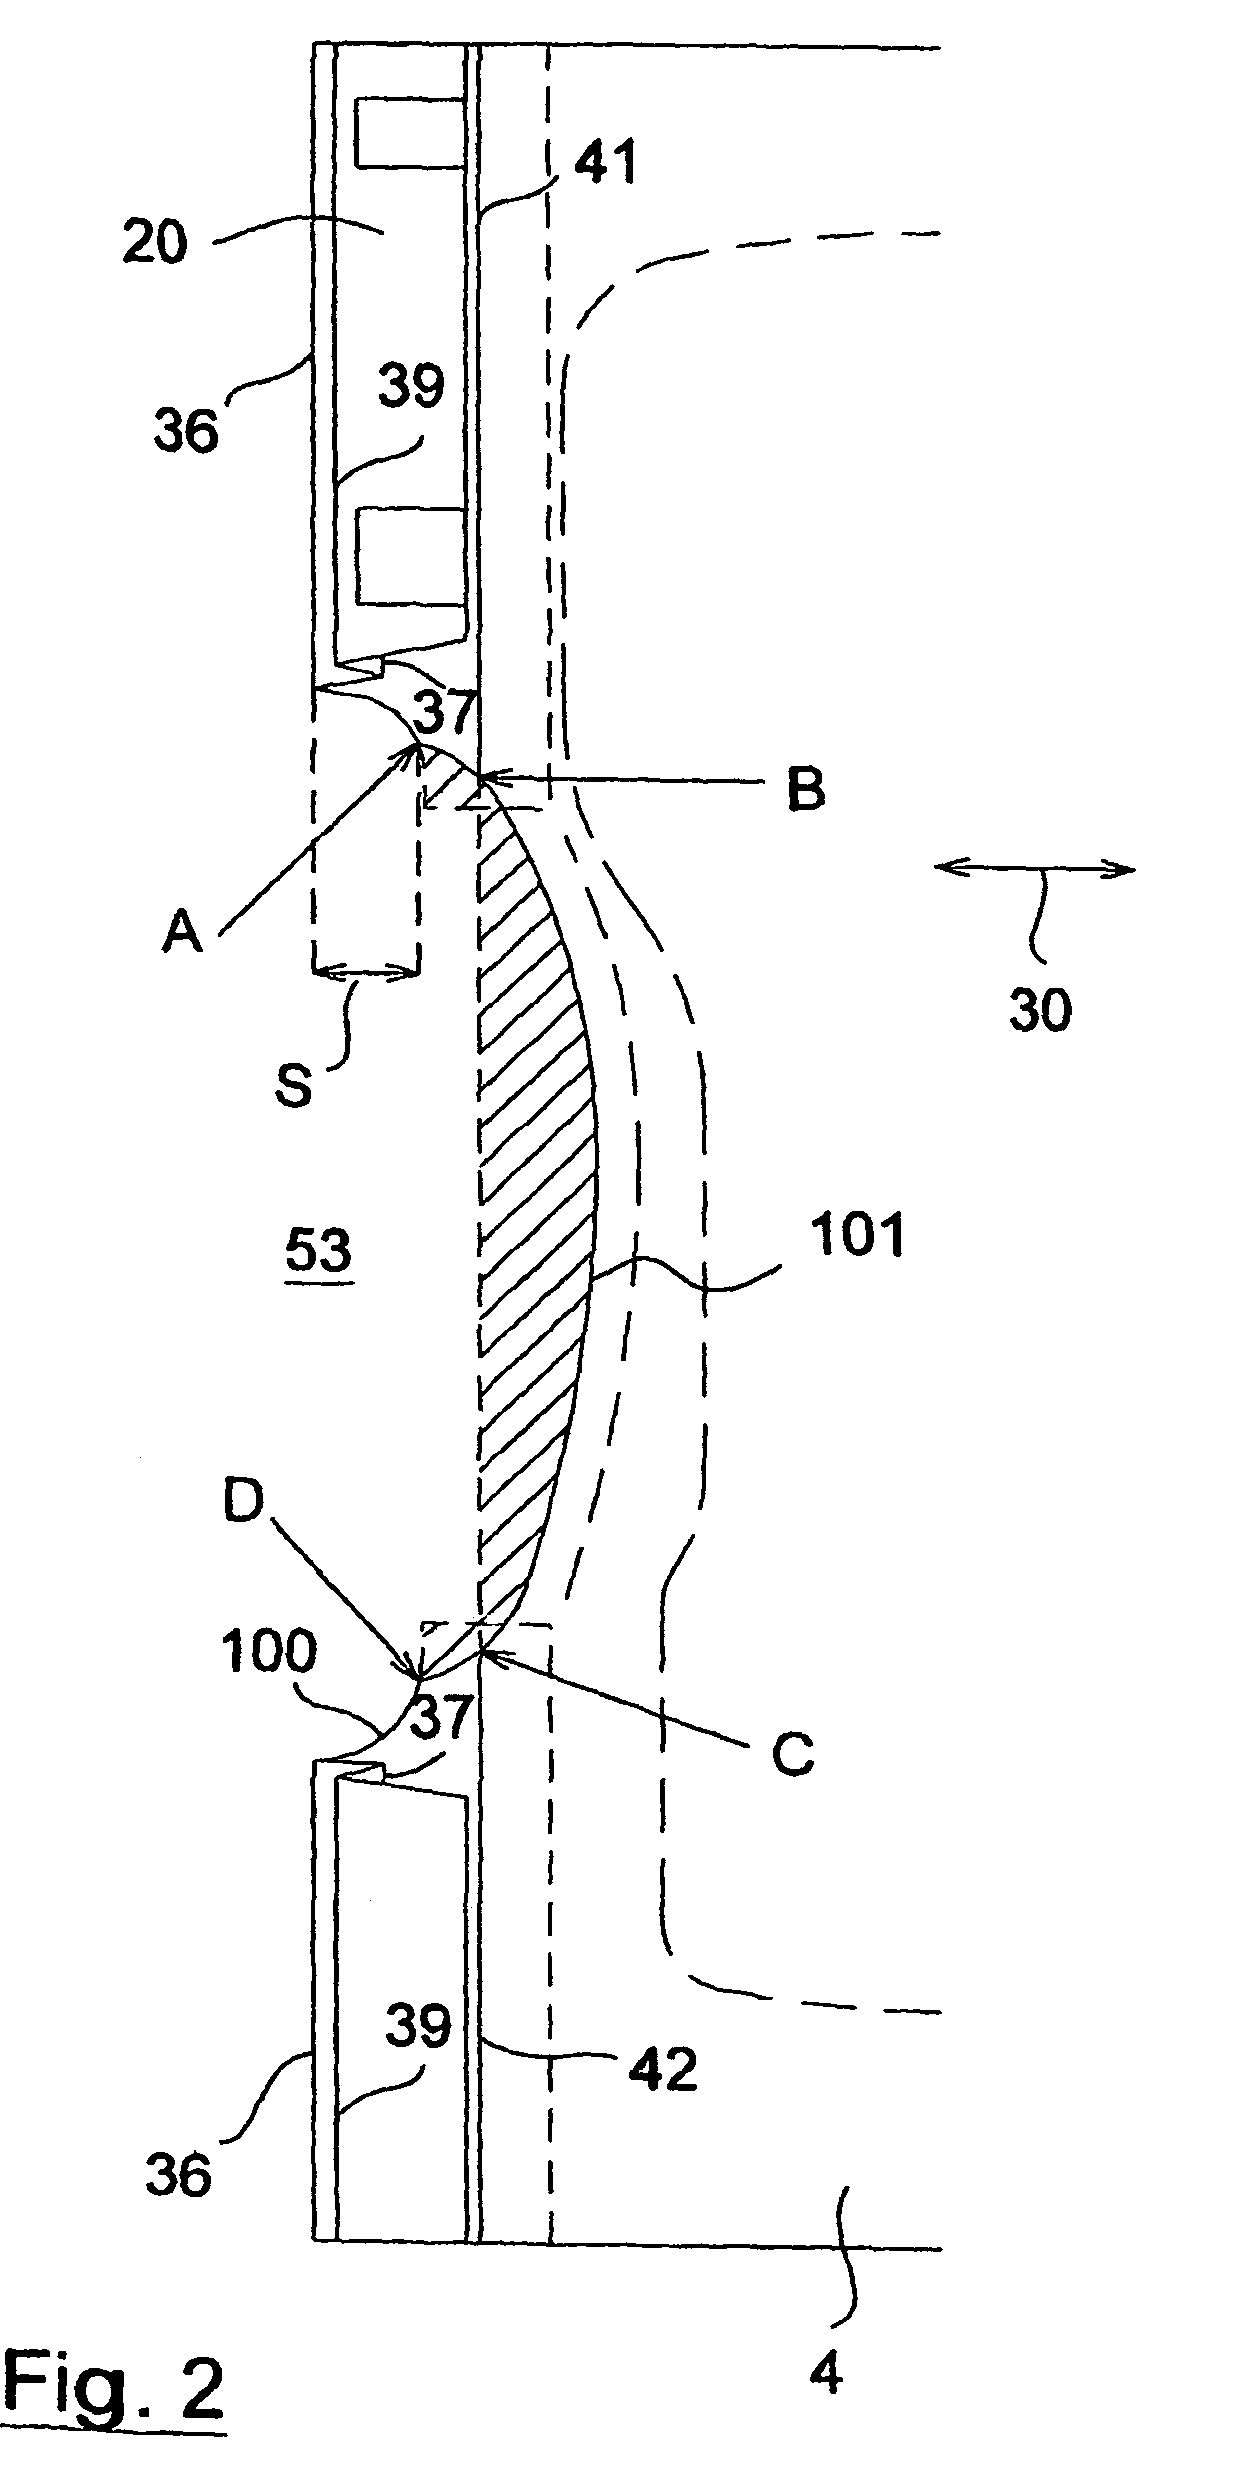 Method of forming an absorbing disposable incontinence diaper